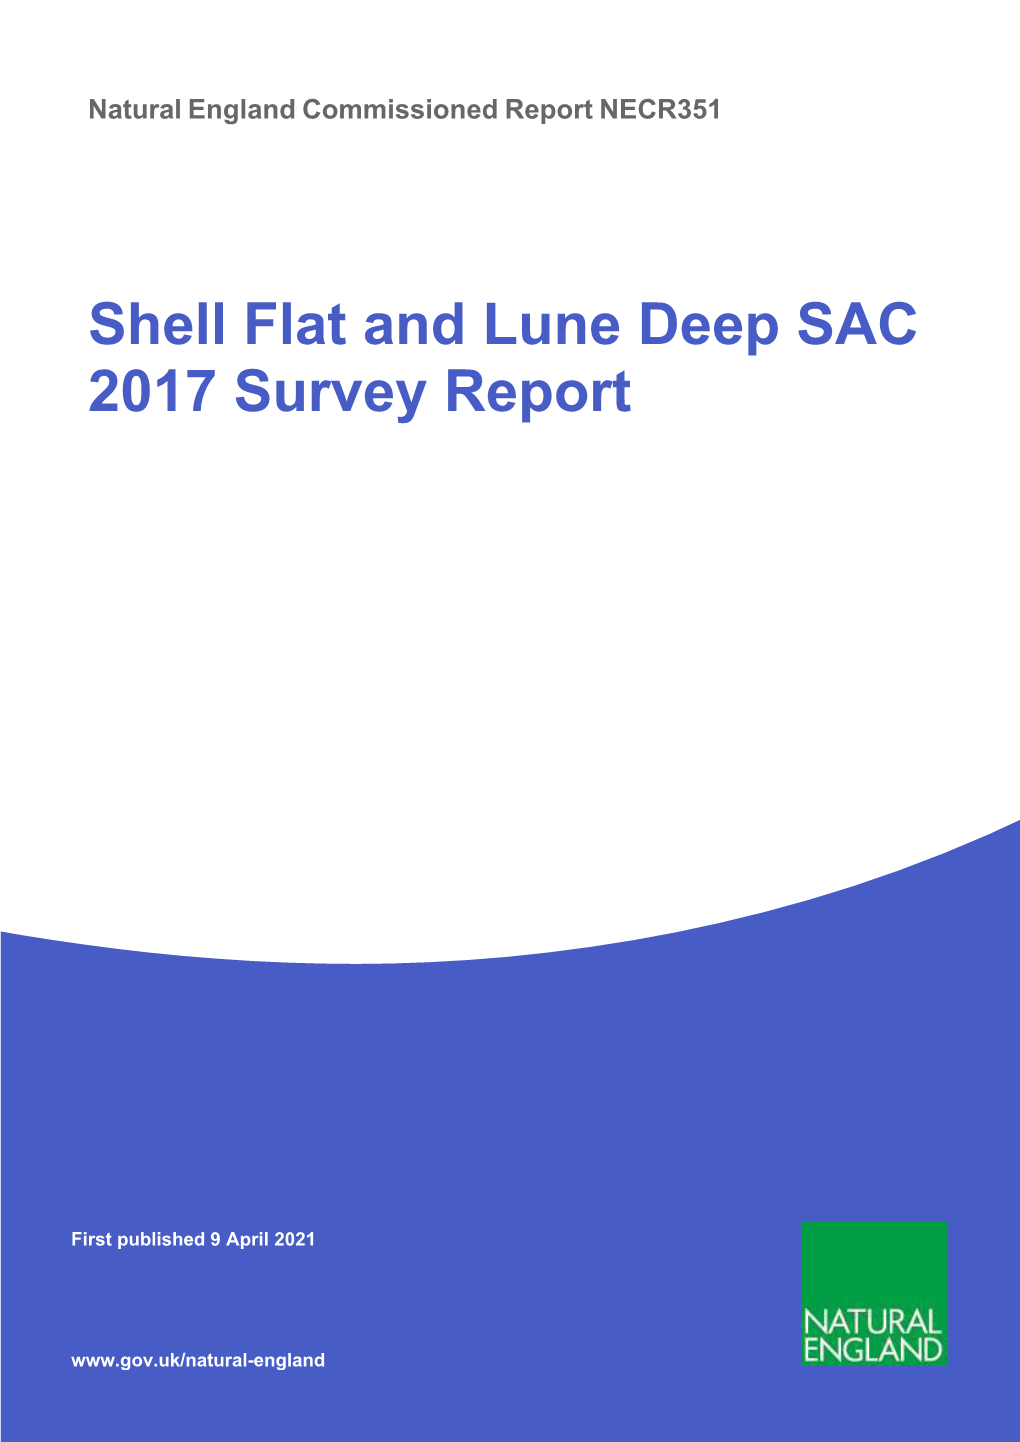 Shell Flat and Lune Deep SAC 2017 Survey Report